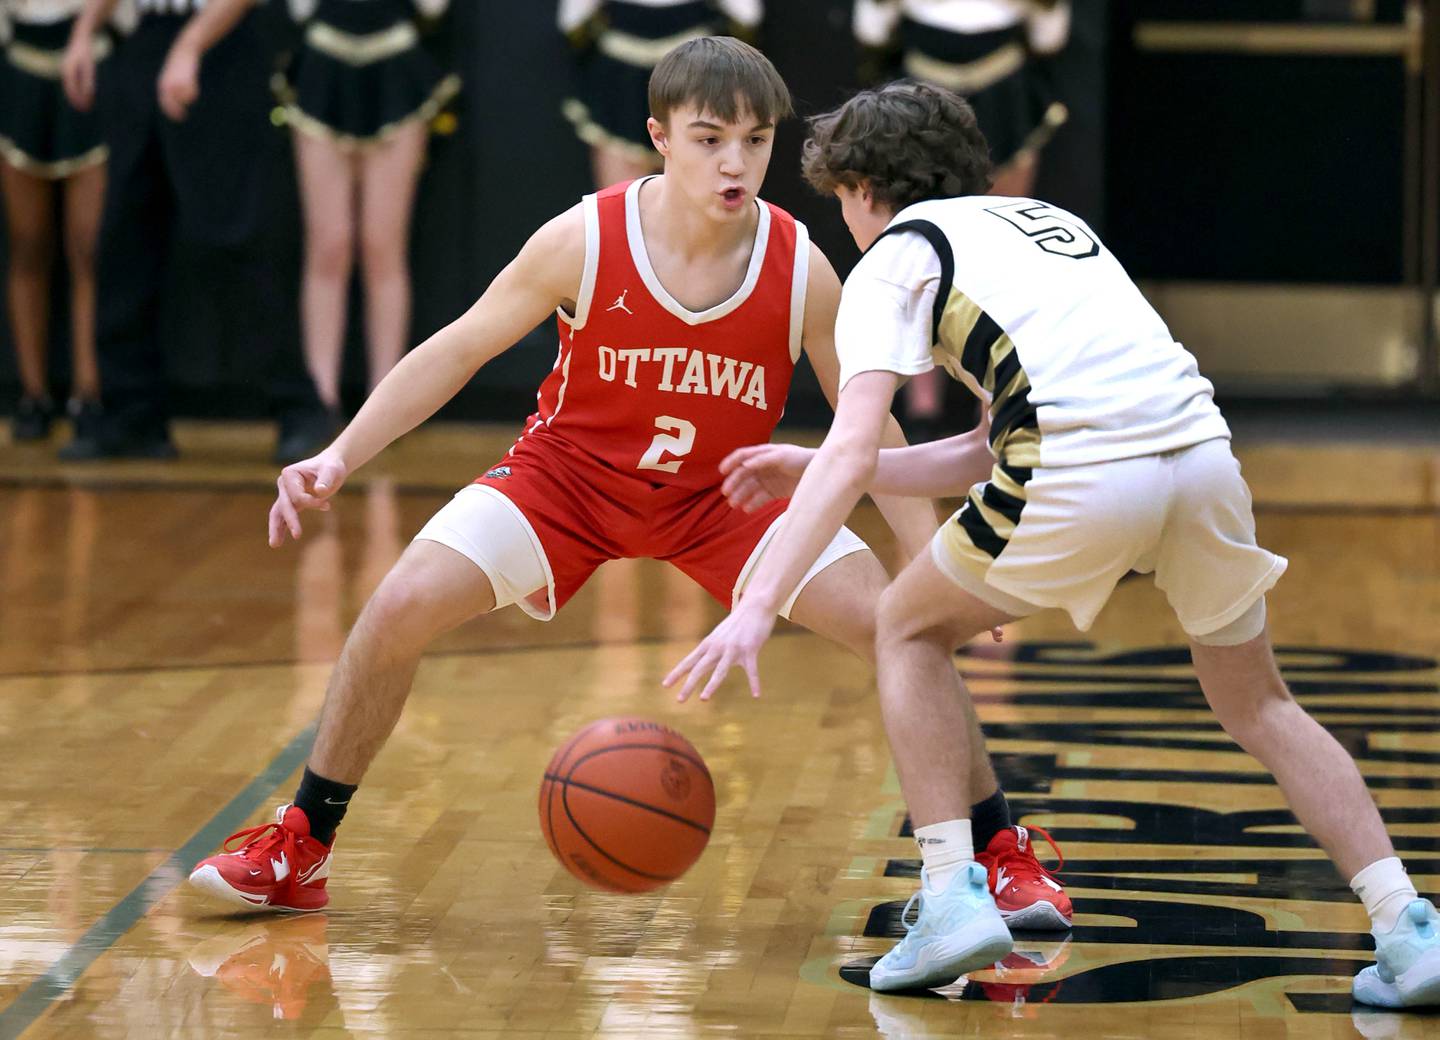 Ottawa's Huston Hart plays defense against Sycamore's Preston Picolotti during their game Friday, Dec. 16, 2022, at Sycamore High School.